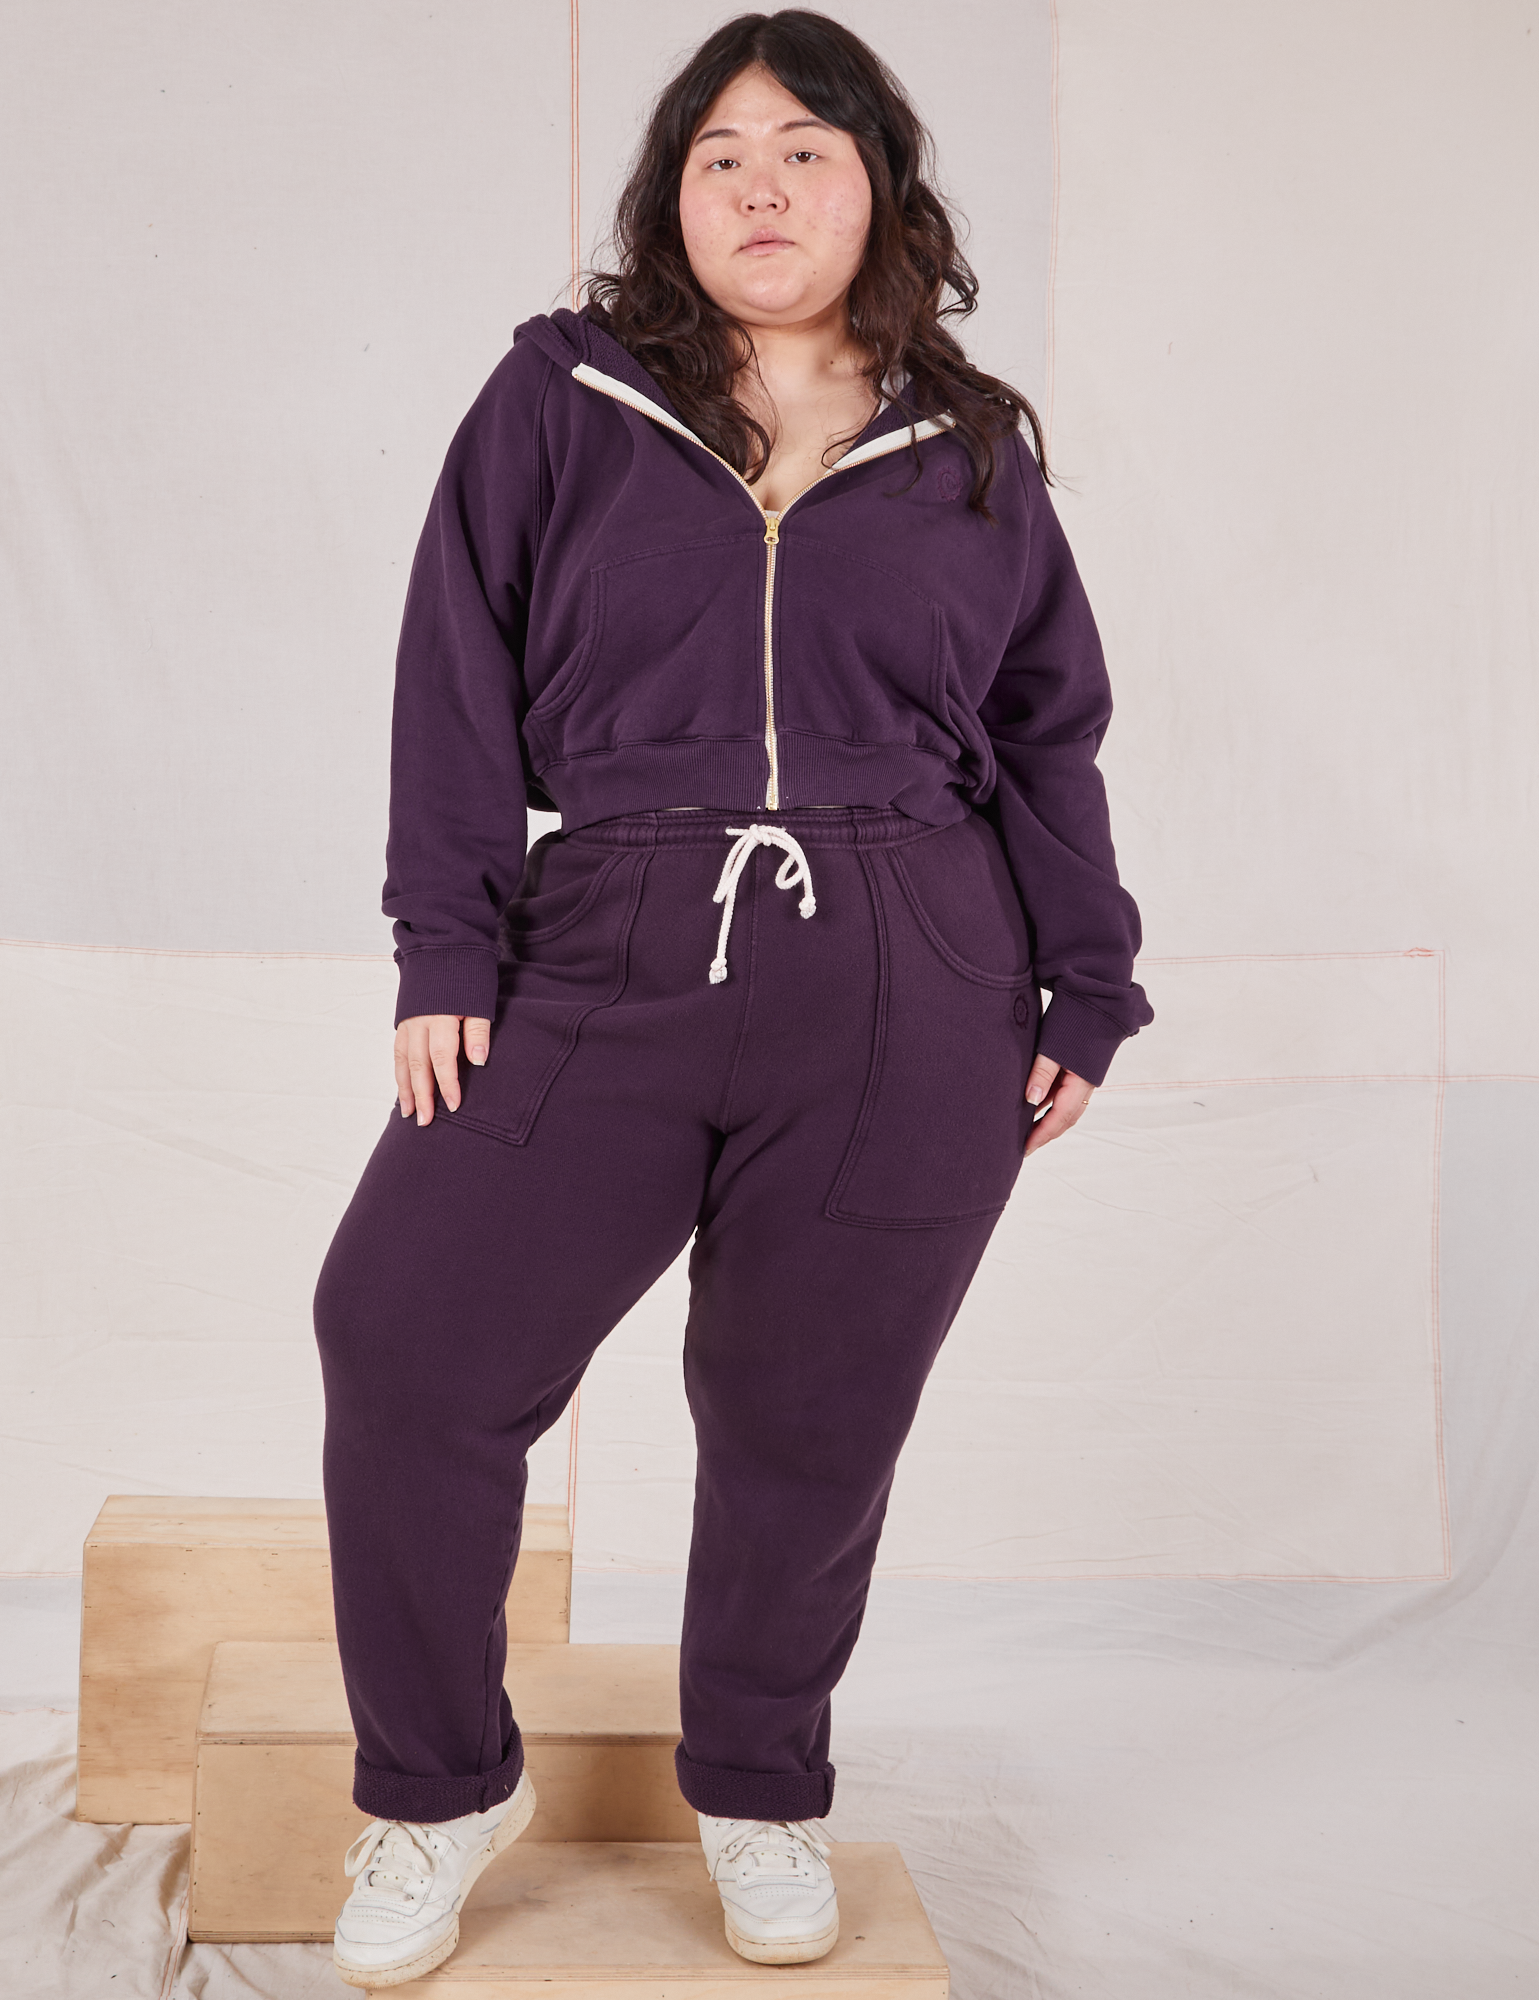 Ashley is wearing Rolled Cuff Sweat Pants in Nebula Purple and matching Cropped Zip Hoodie